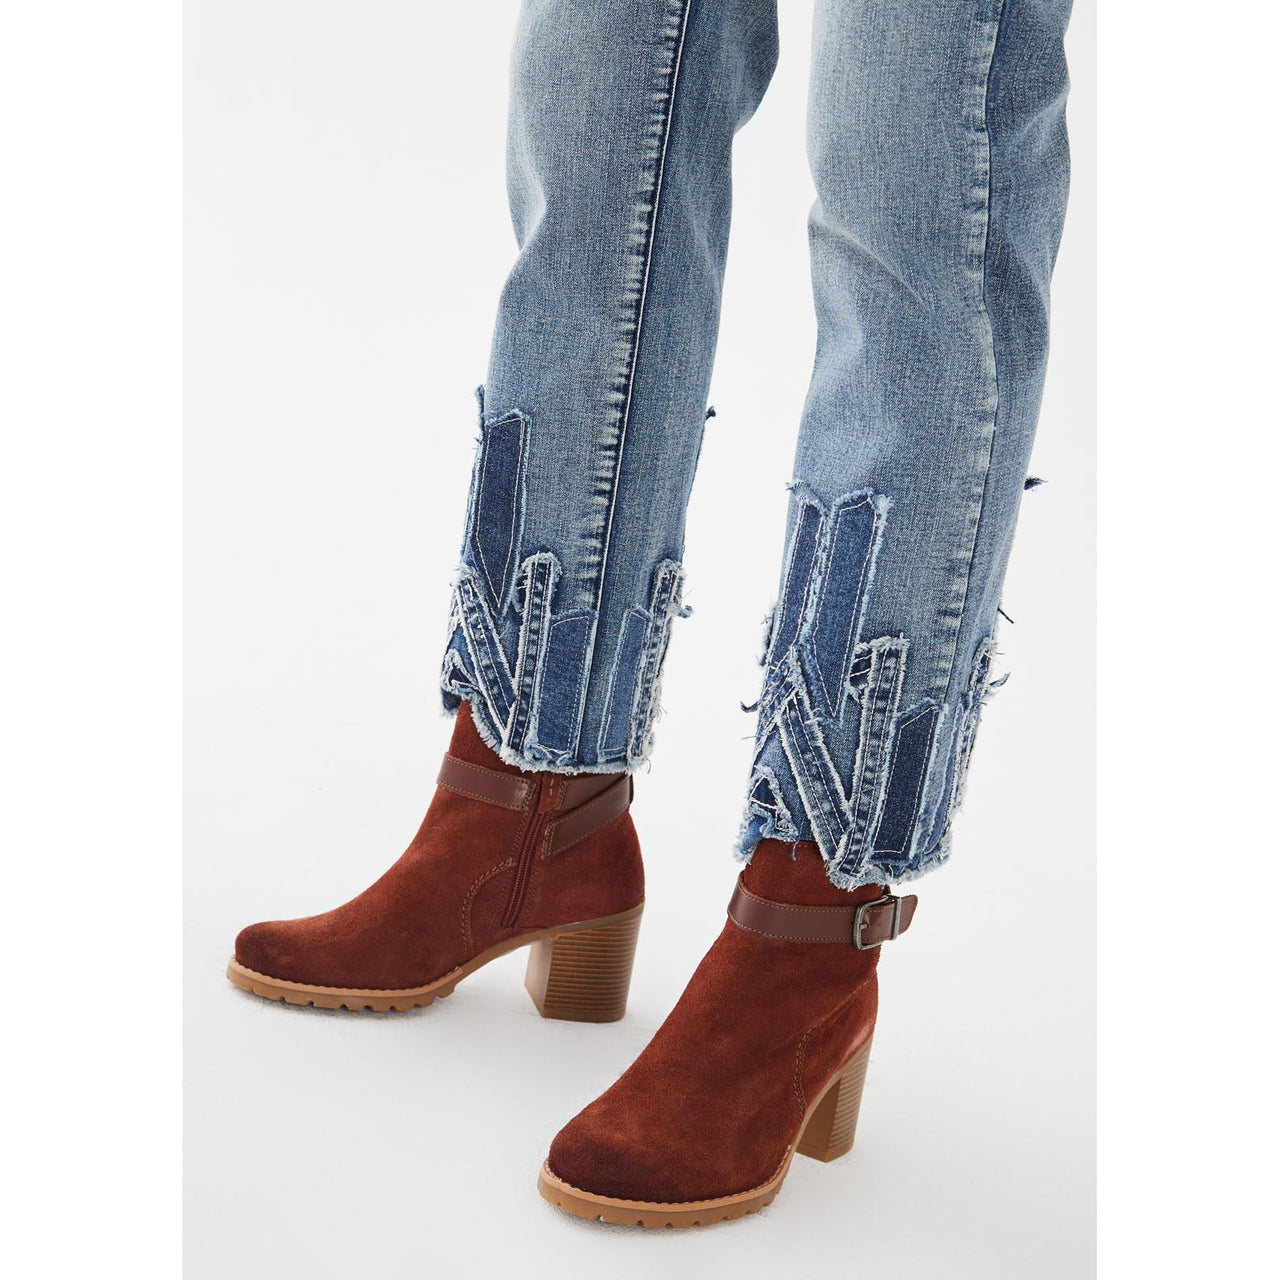 FDJ Suzanne Straight Ankle Jeans - Viblue